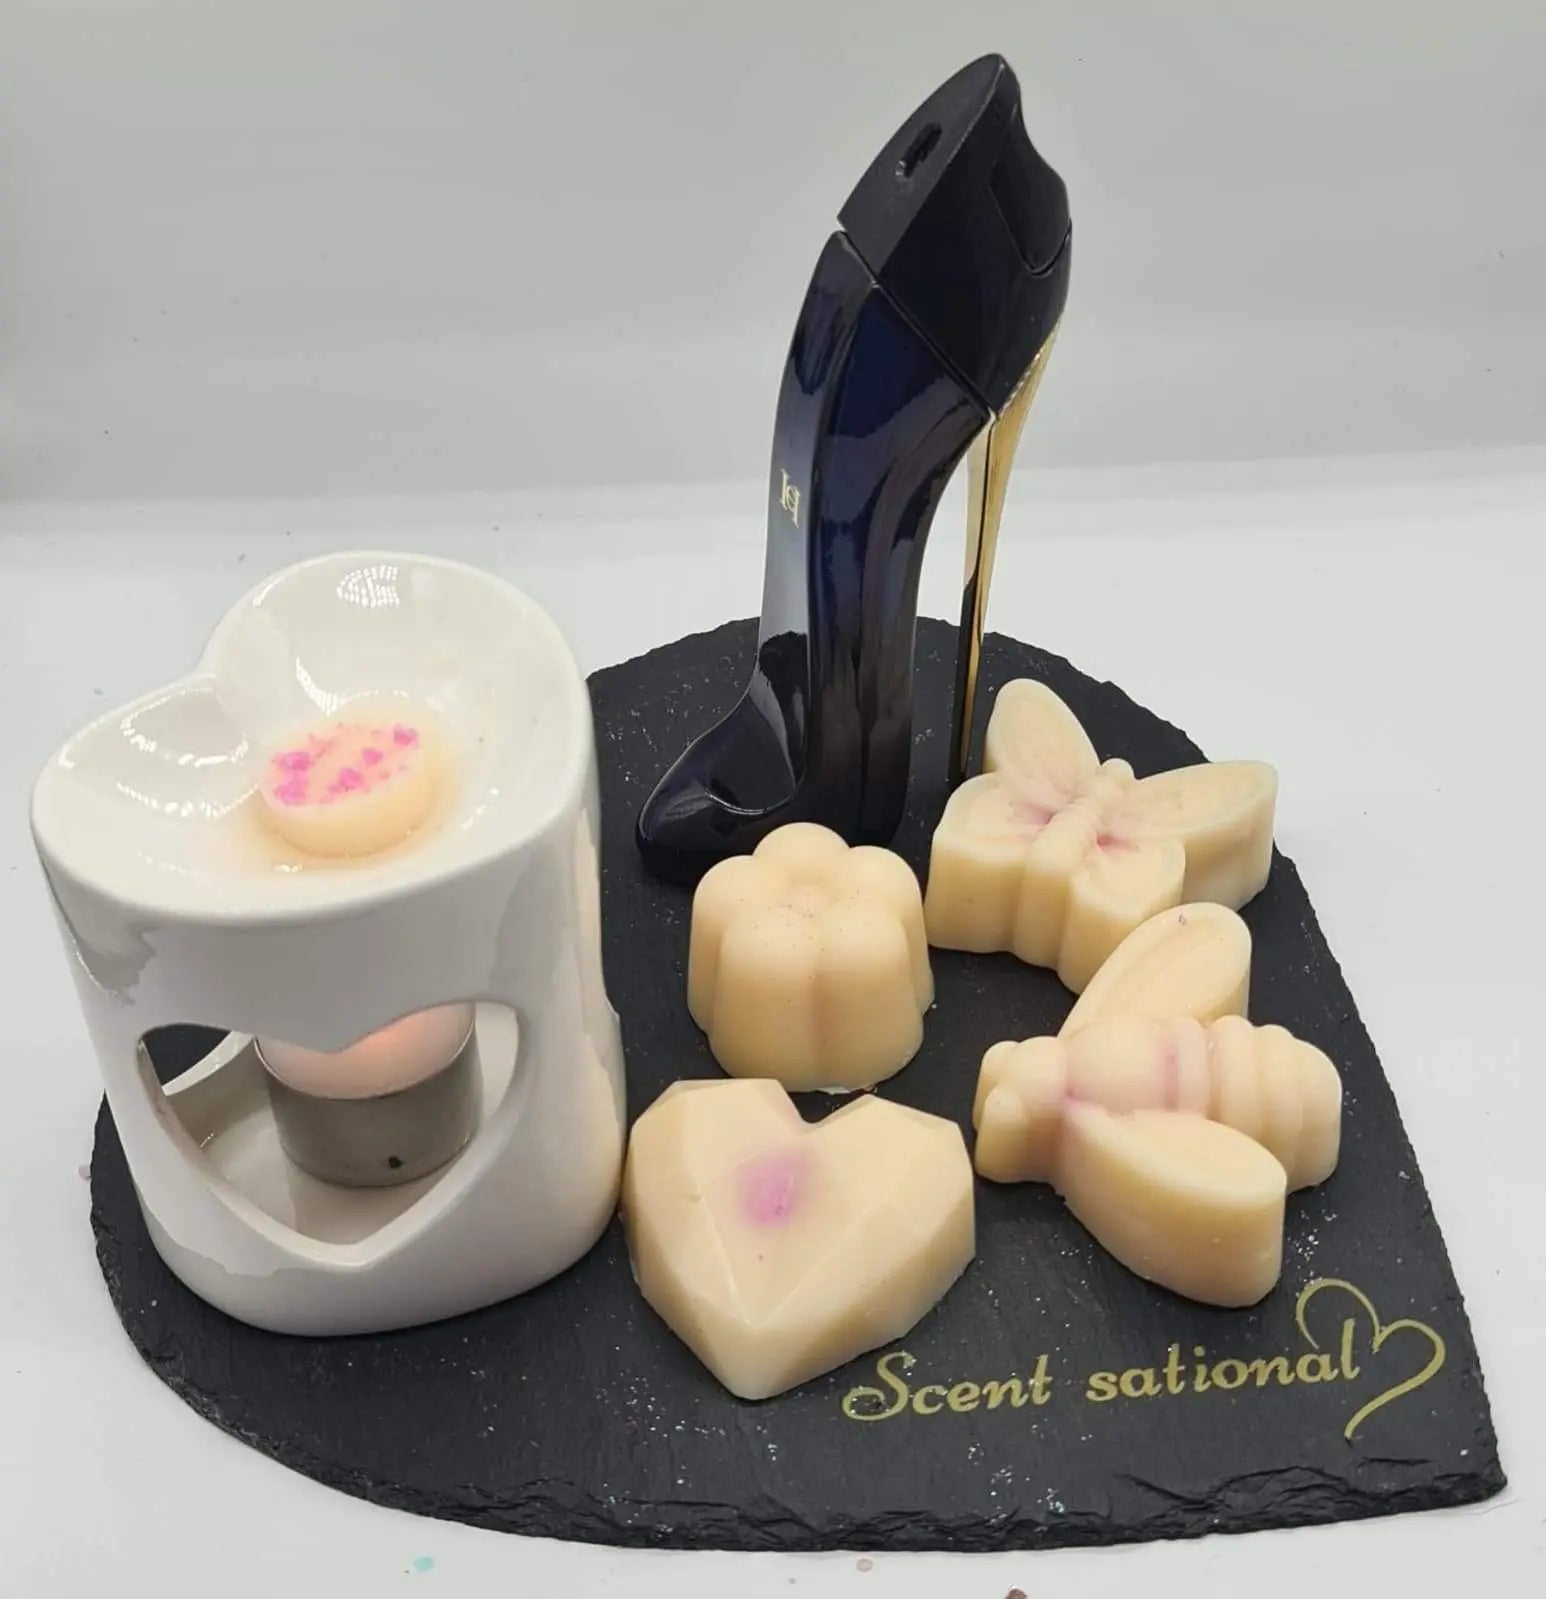 Great Girl Wax Melts Scent Sational Wax melts